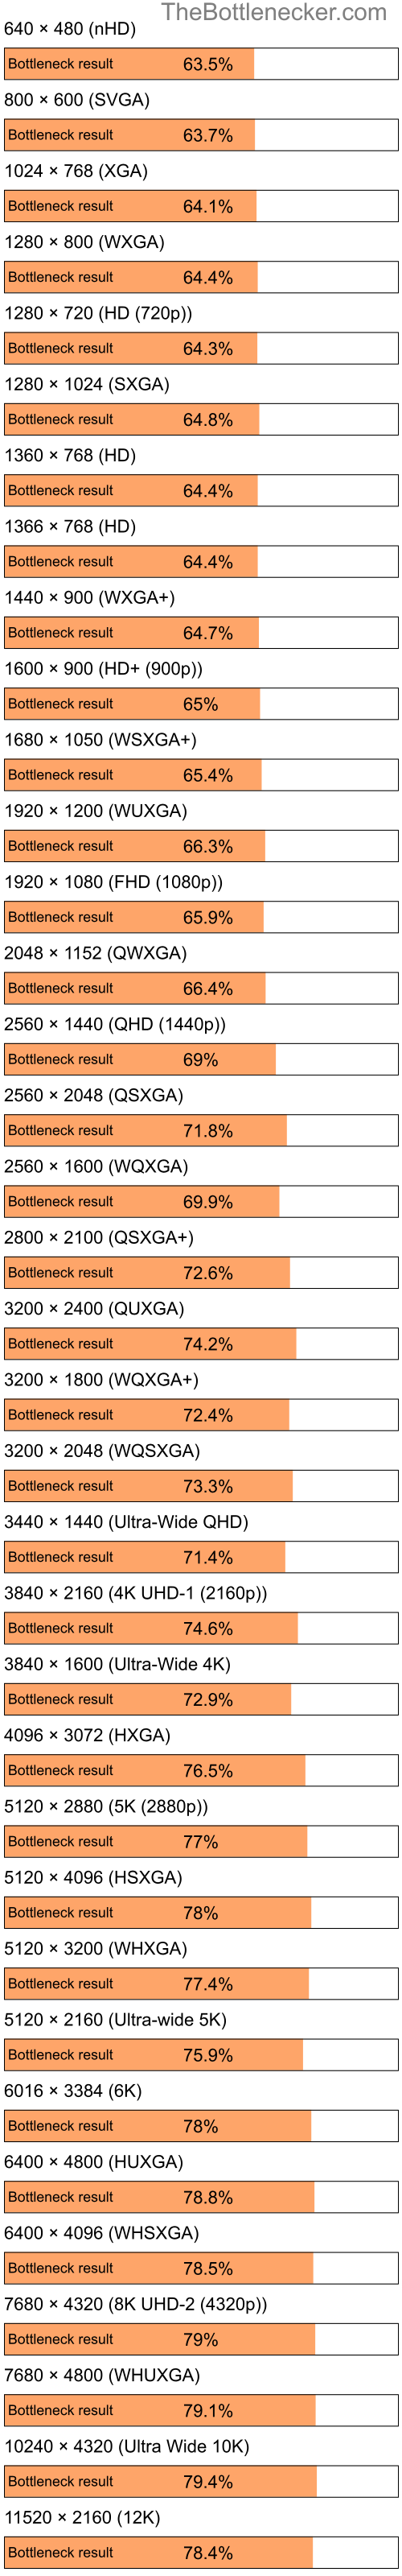 Bottleneck results by resolution for Intel Pentium 4 and NVIDIA GeForce Go 7200 in Processor Intense Tasks